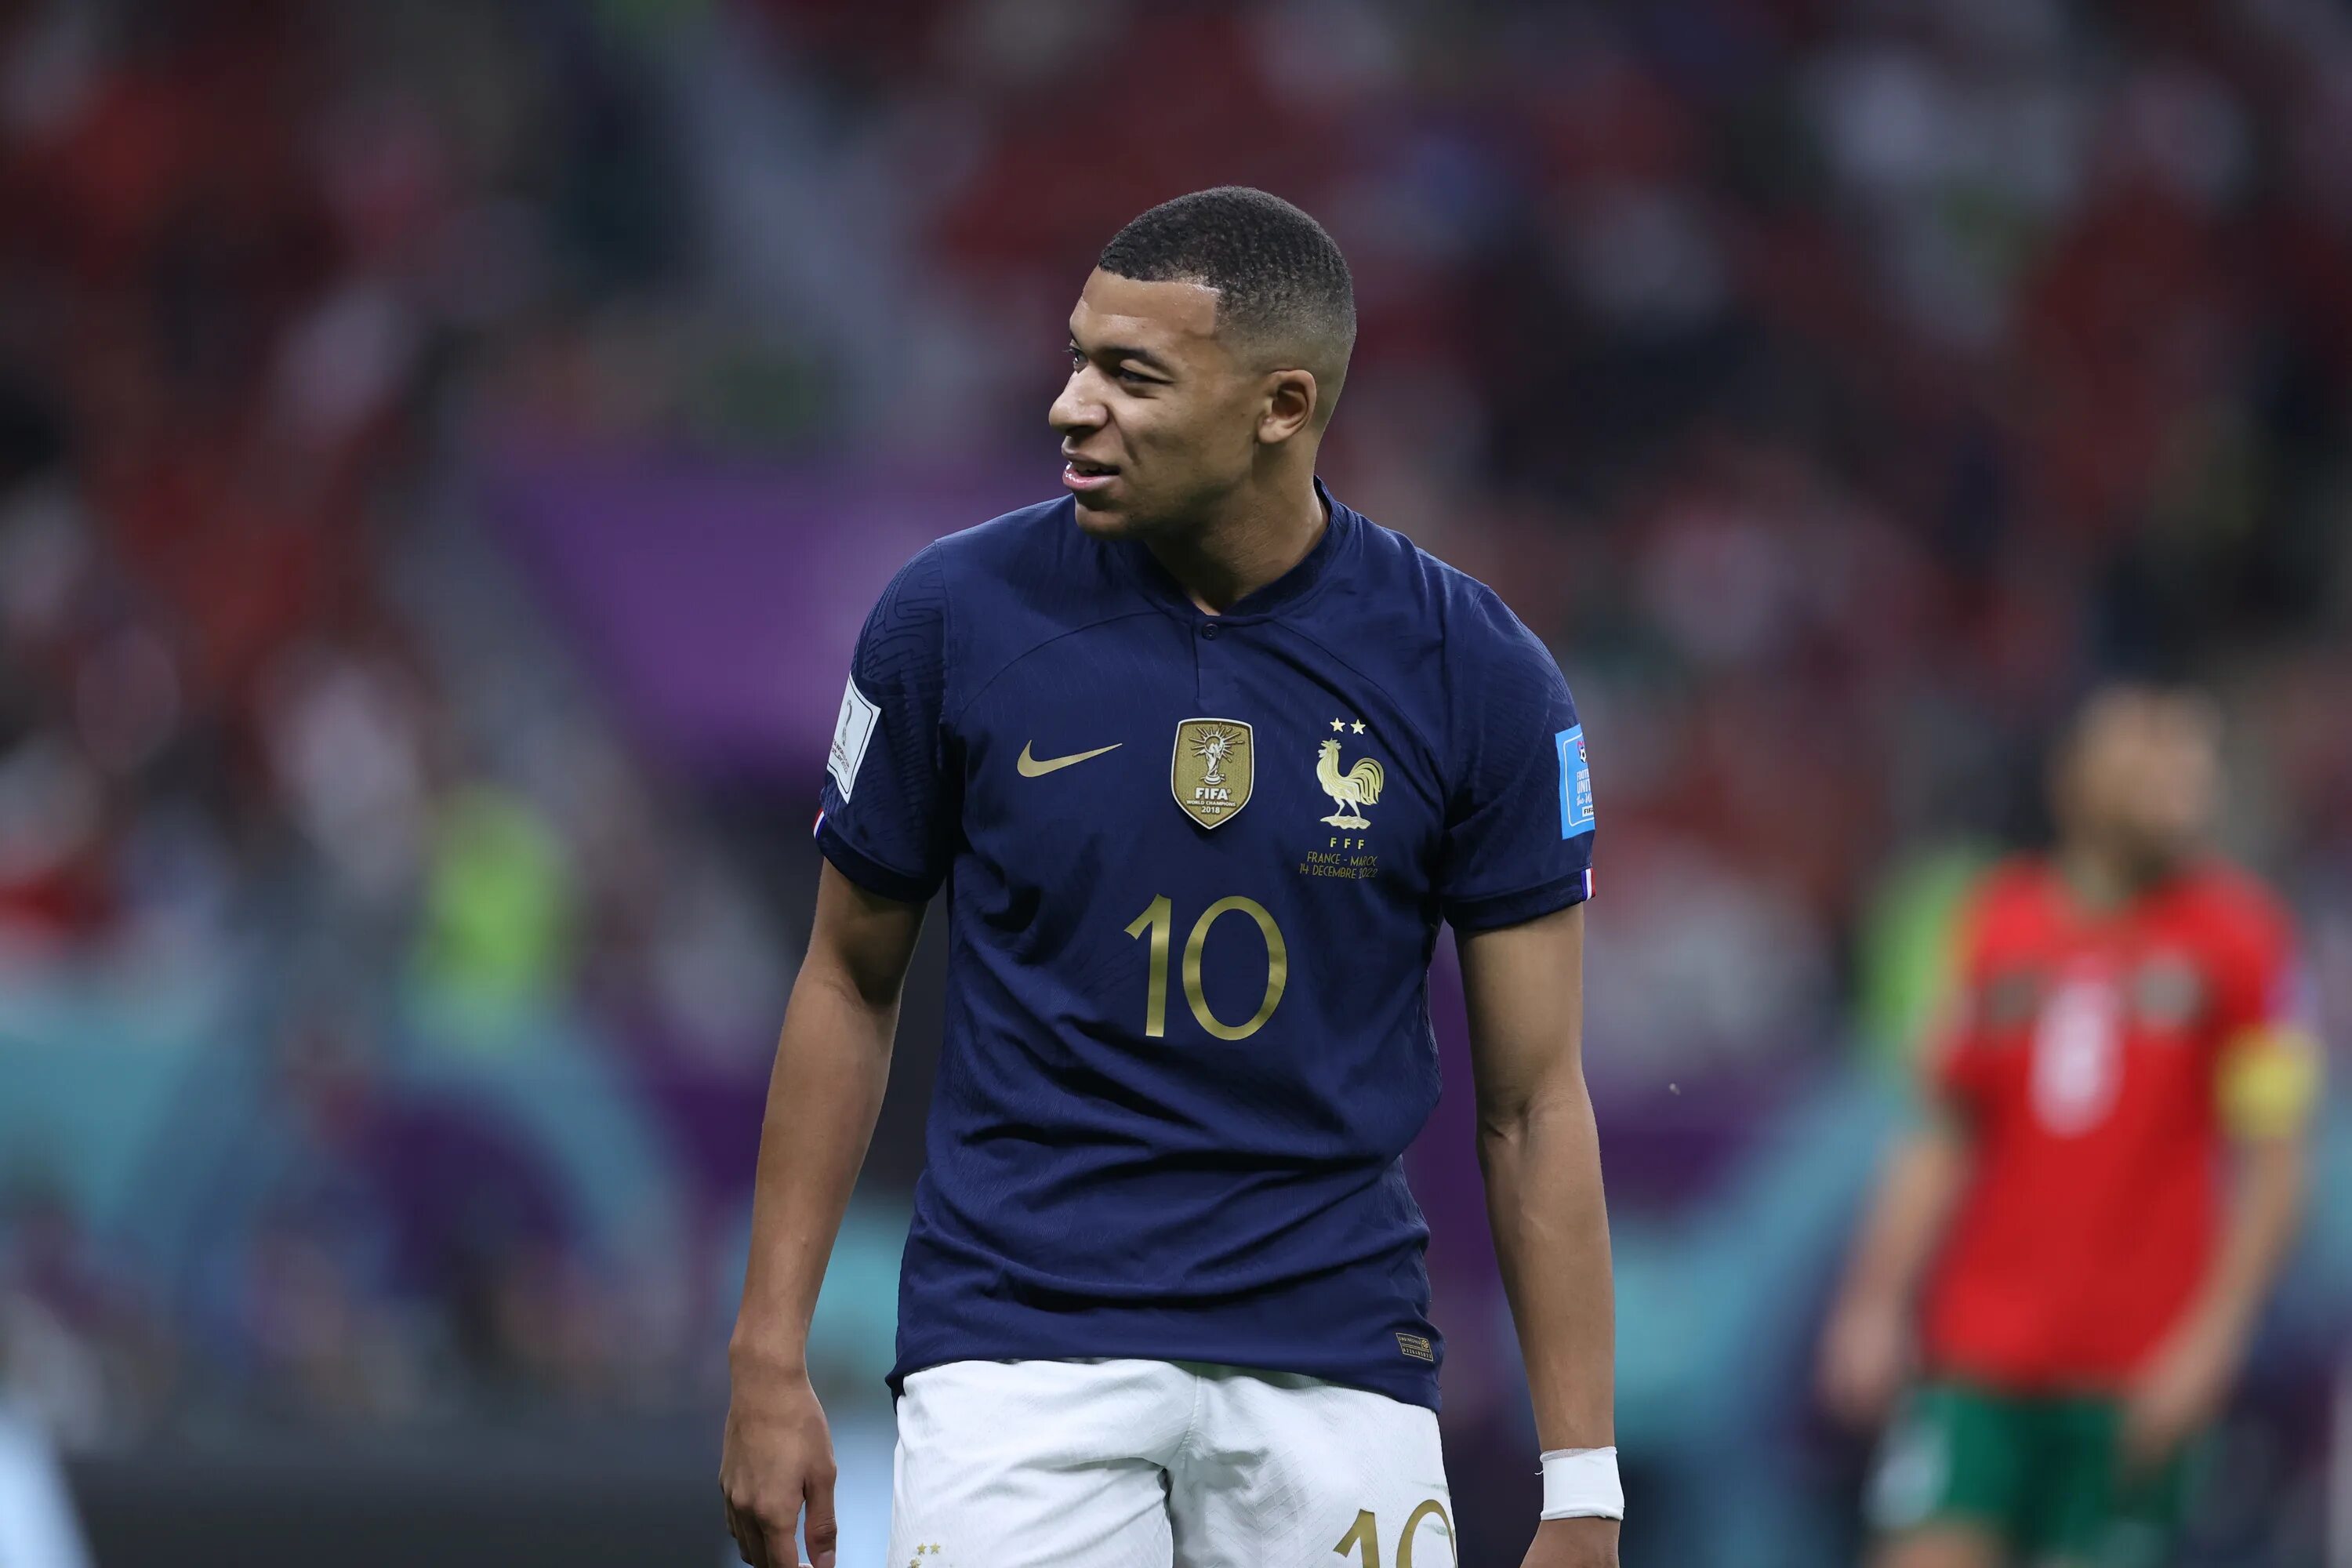 Kylian Mbappe 2022. Мбаппе сборная Франции. Мбаппе Франция 2022. Kylian Mbappe France World Cup 2022.